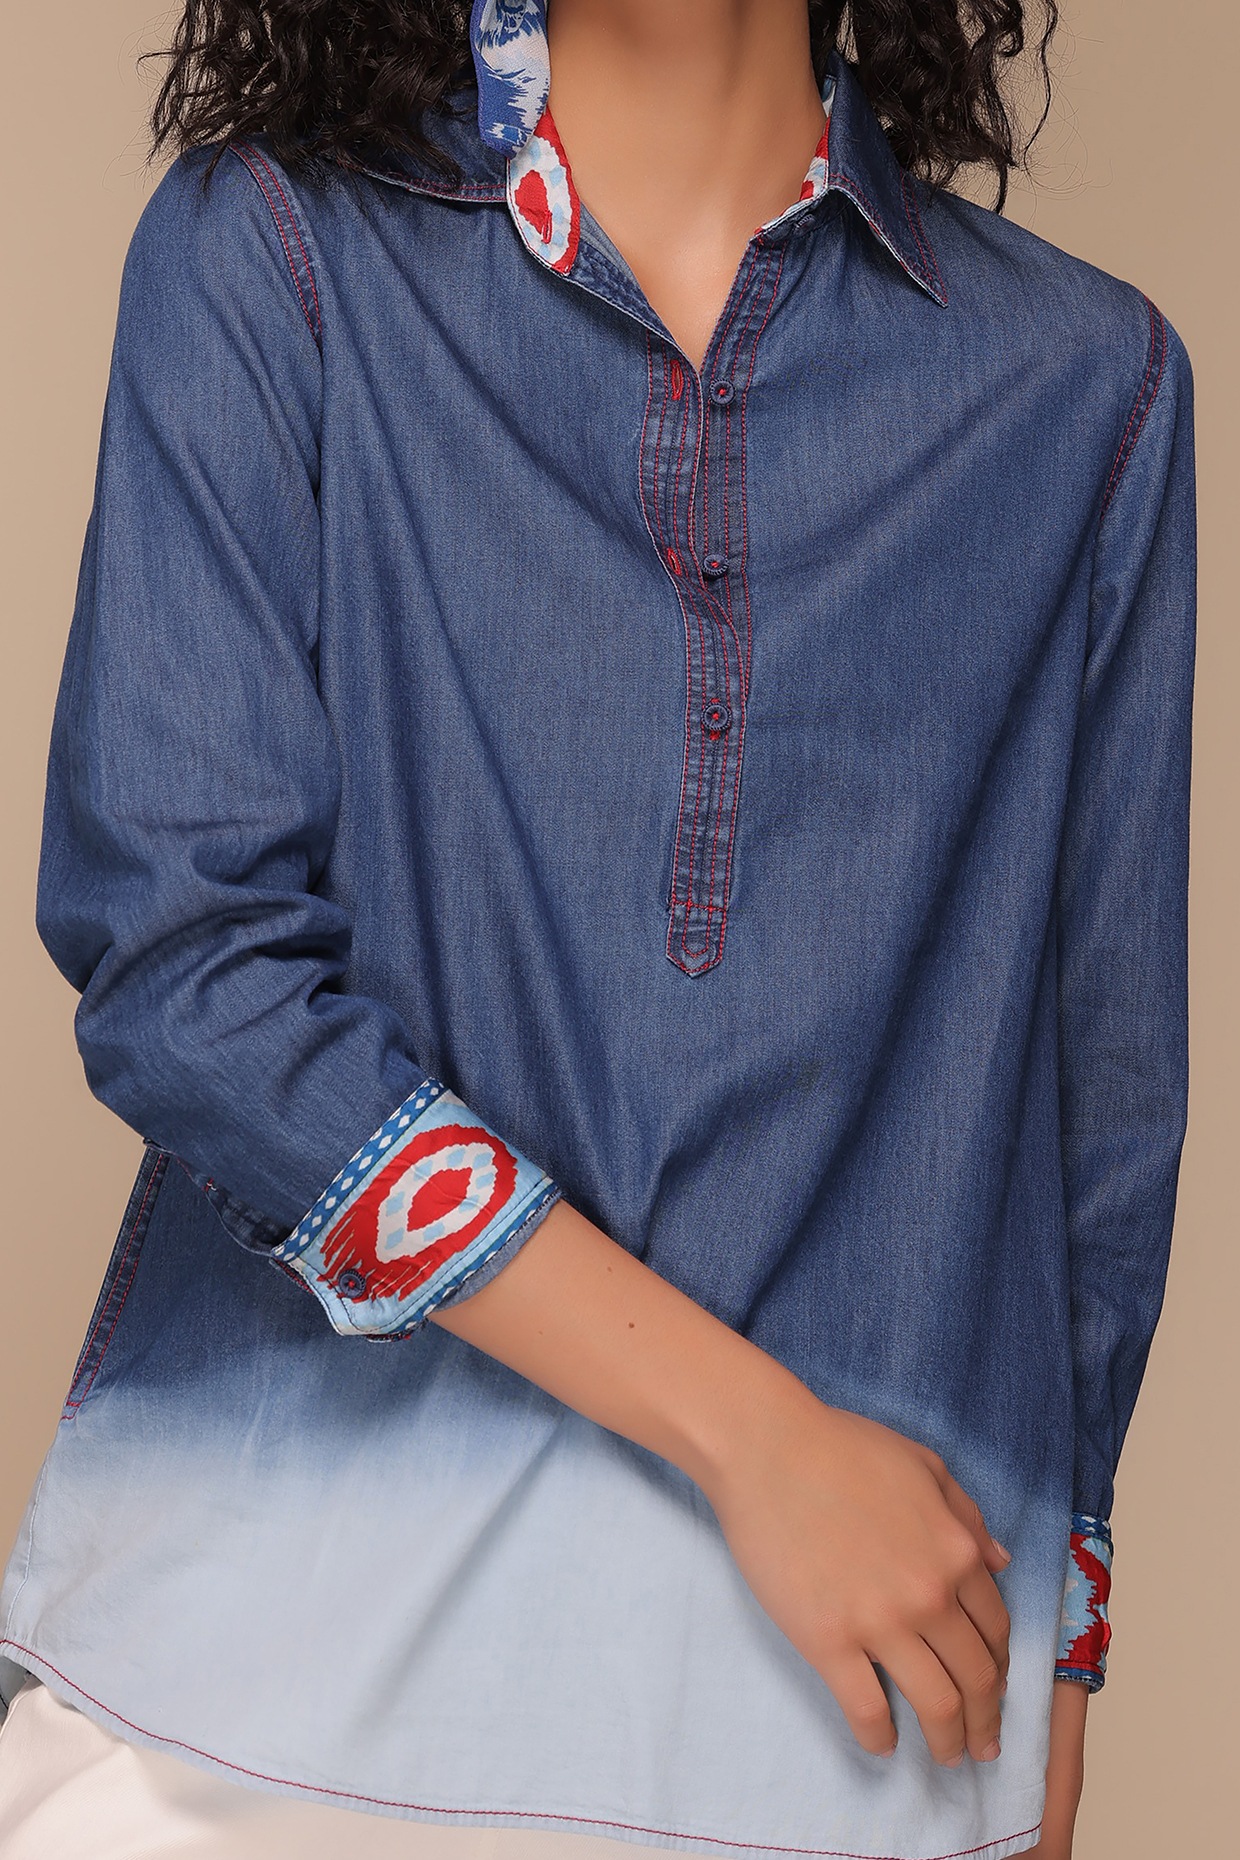 ONLY Women Embroidered Casual Blue Shirt - Buy ONLY Women Embroidered  Casual Blue Shirt Online at Best Prices in India | Flipkart.com